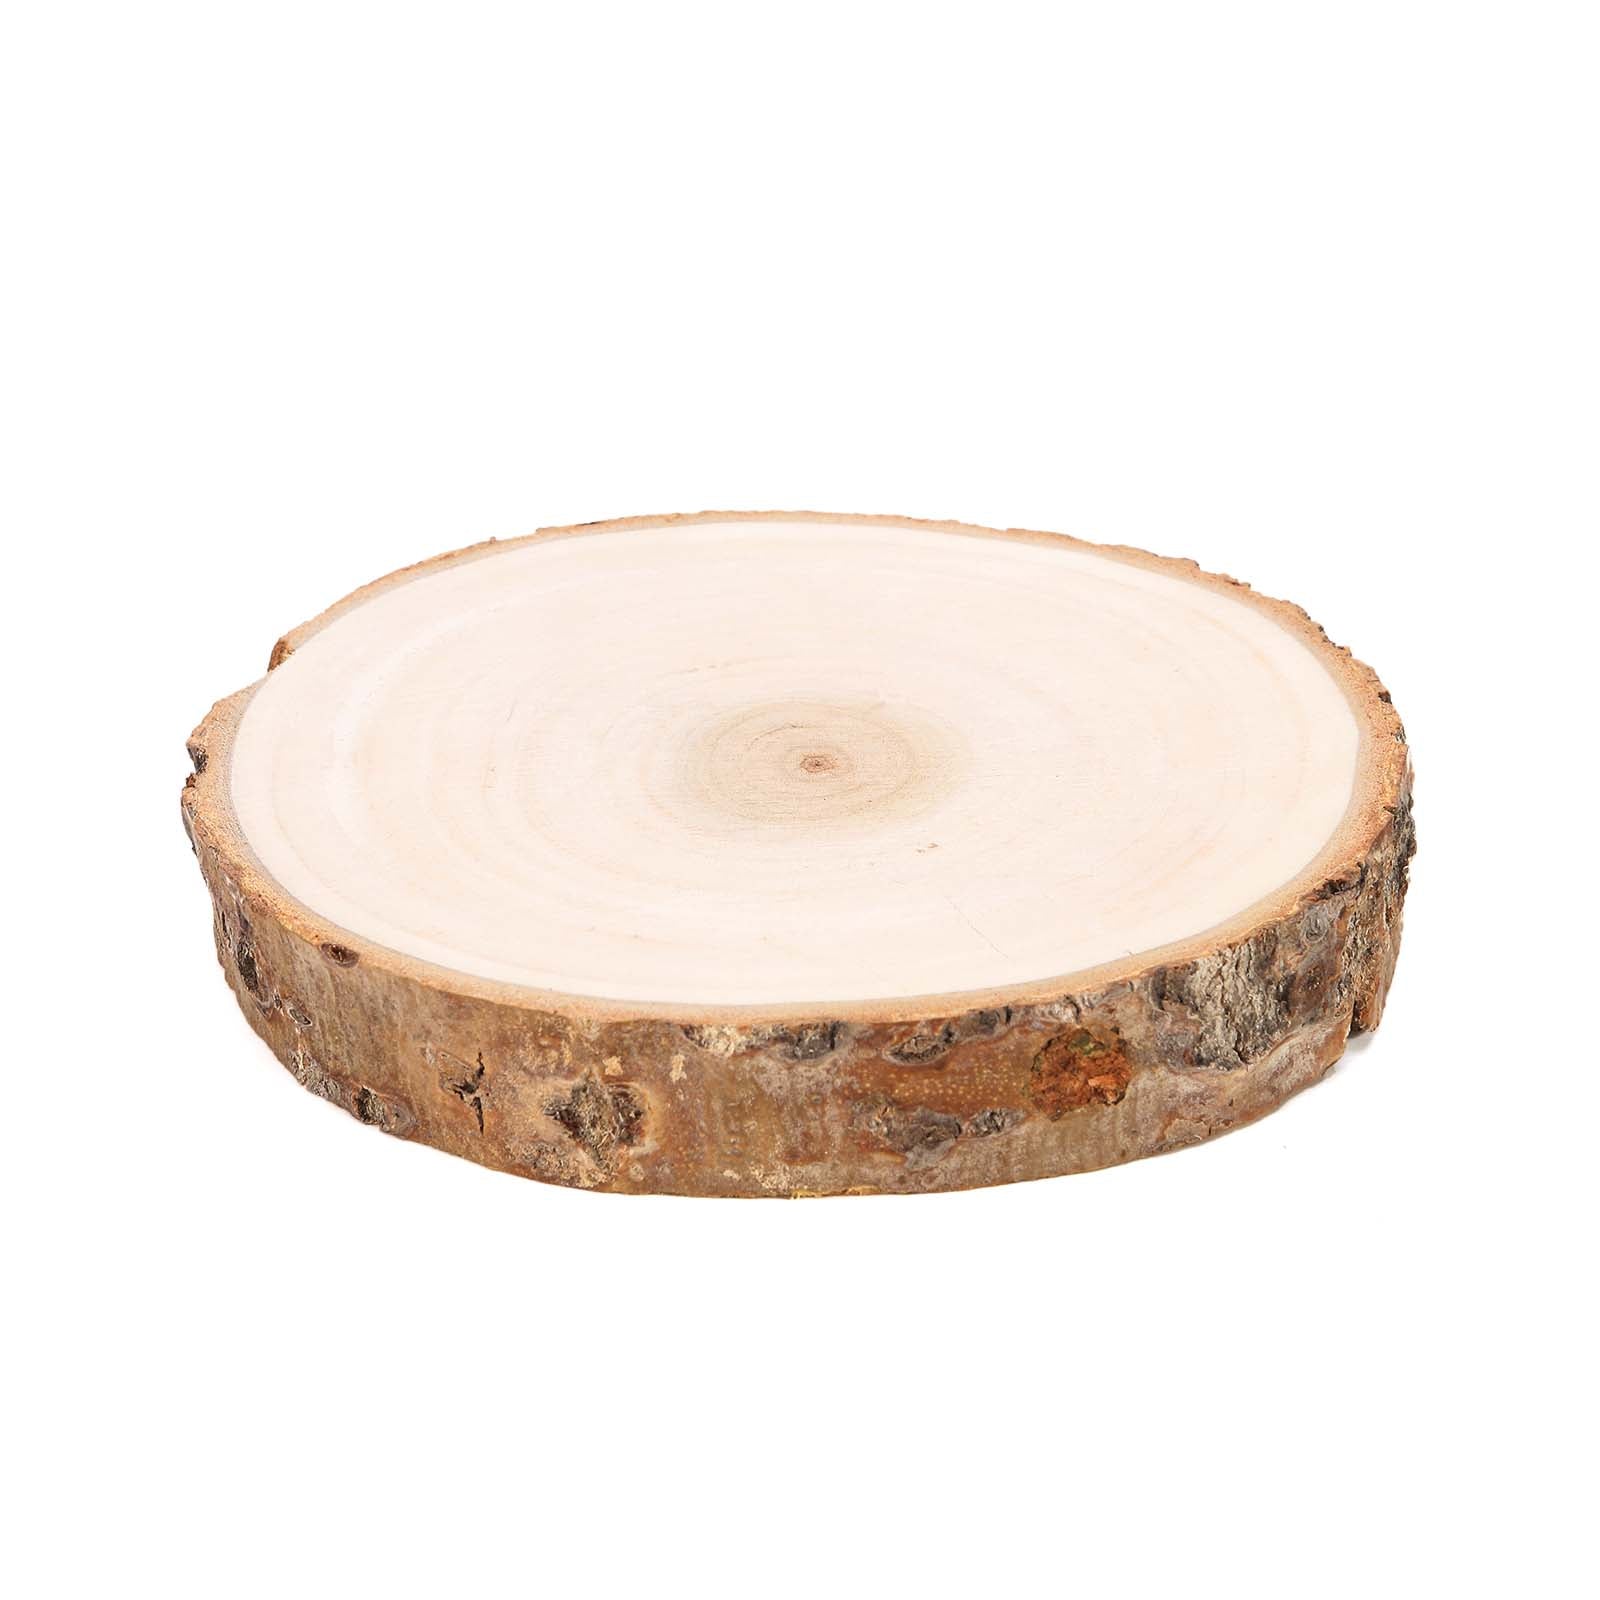 Caydo 4 Pieces 7-8 Inch Wood Slices for Centerpieces Natural Round